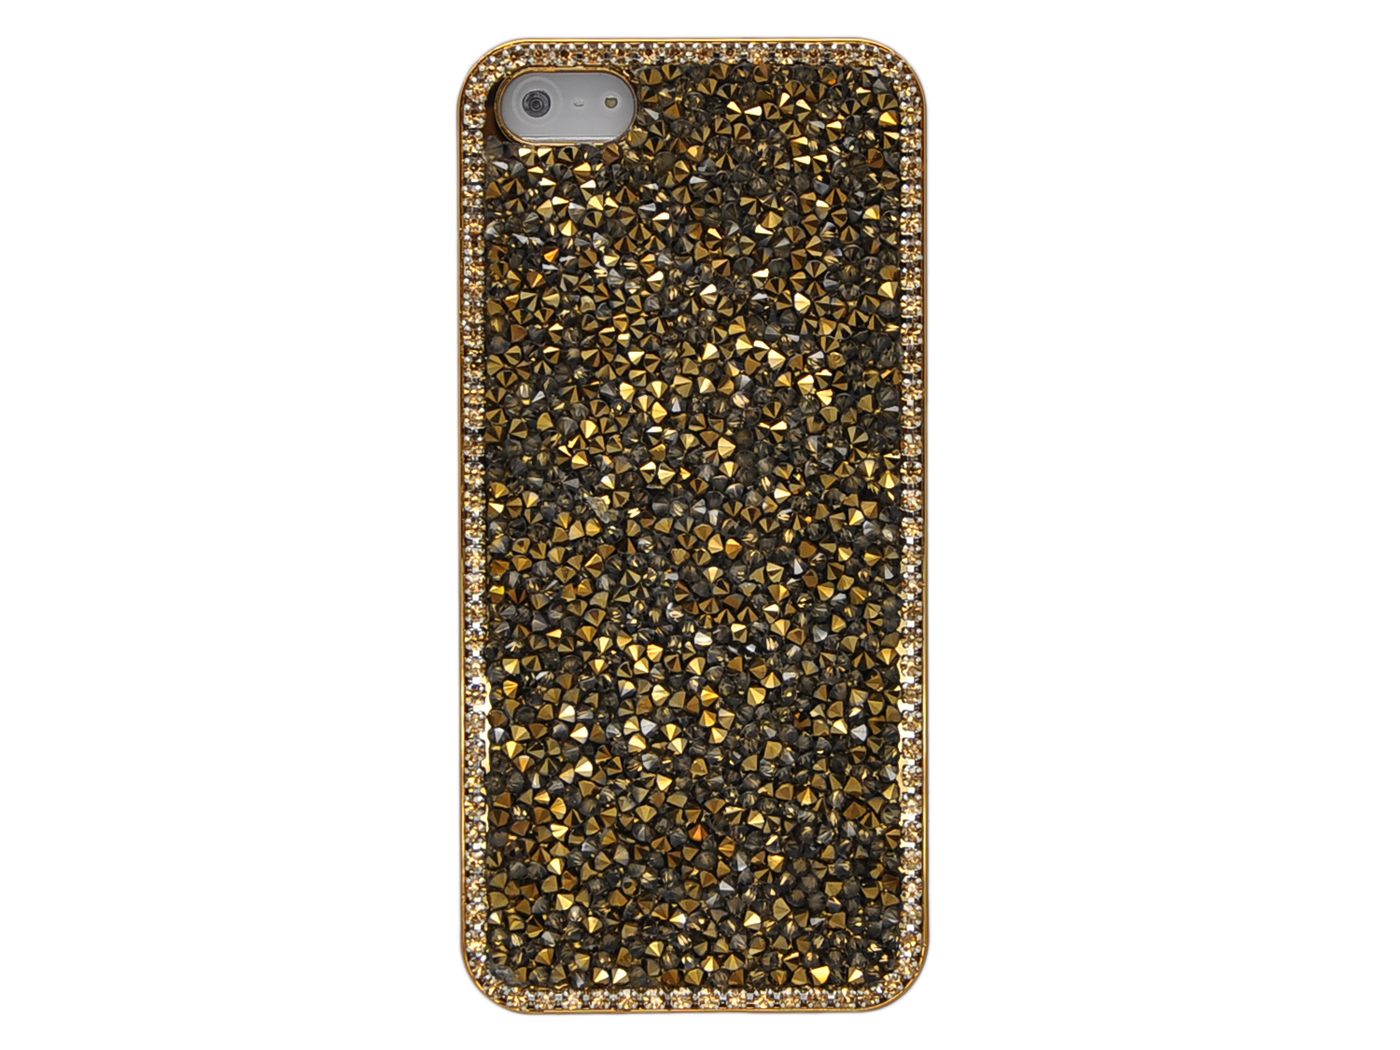 VWTECH® For iPhone 5 5G 5S Hard PC & Metal Diamond Rhinestone Crystal Sparkle Bling Snap On Case Cover